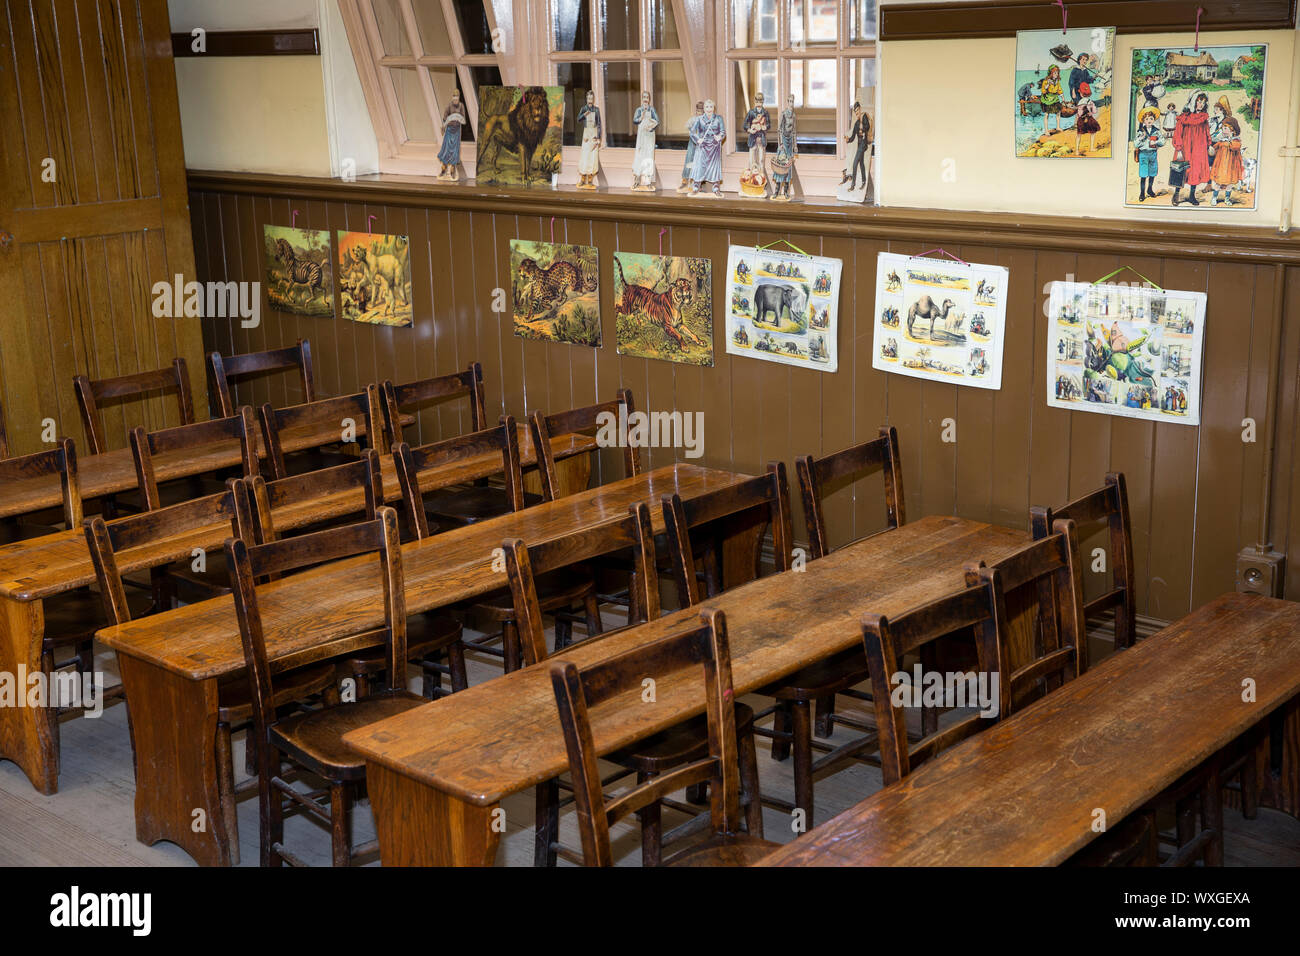 UK, County Durham, Beamish, Museum,  Pit Village, School junior classroom circa 1913, desks and chairs below ediucational material on wall Stock Photo